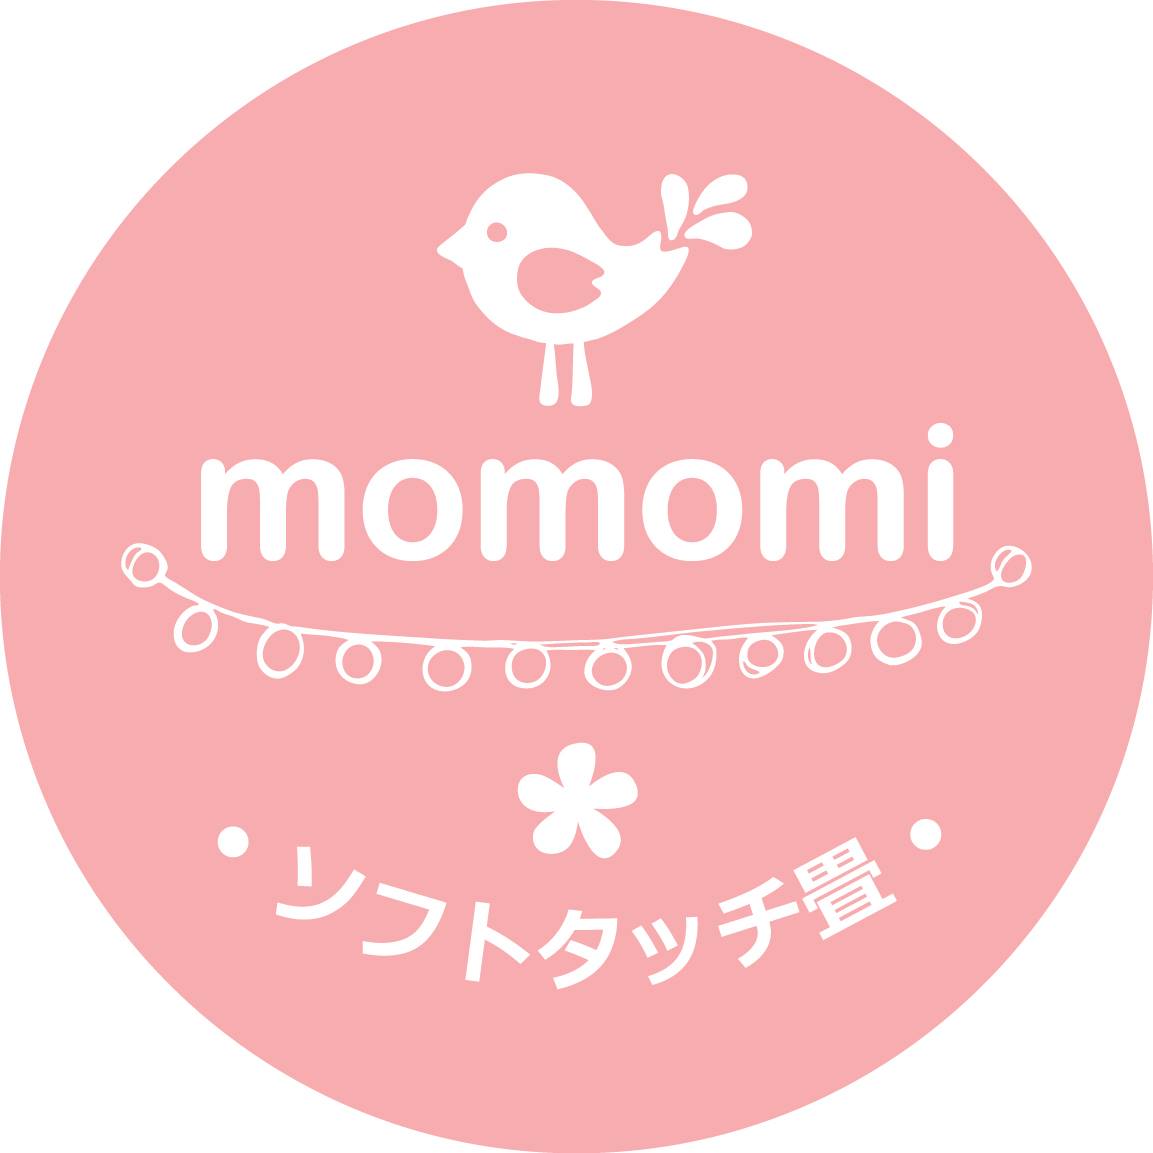 How Momomi Grew Its Brand Through Word-of-Mouth